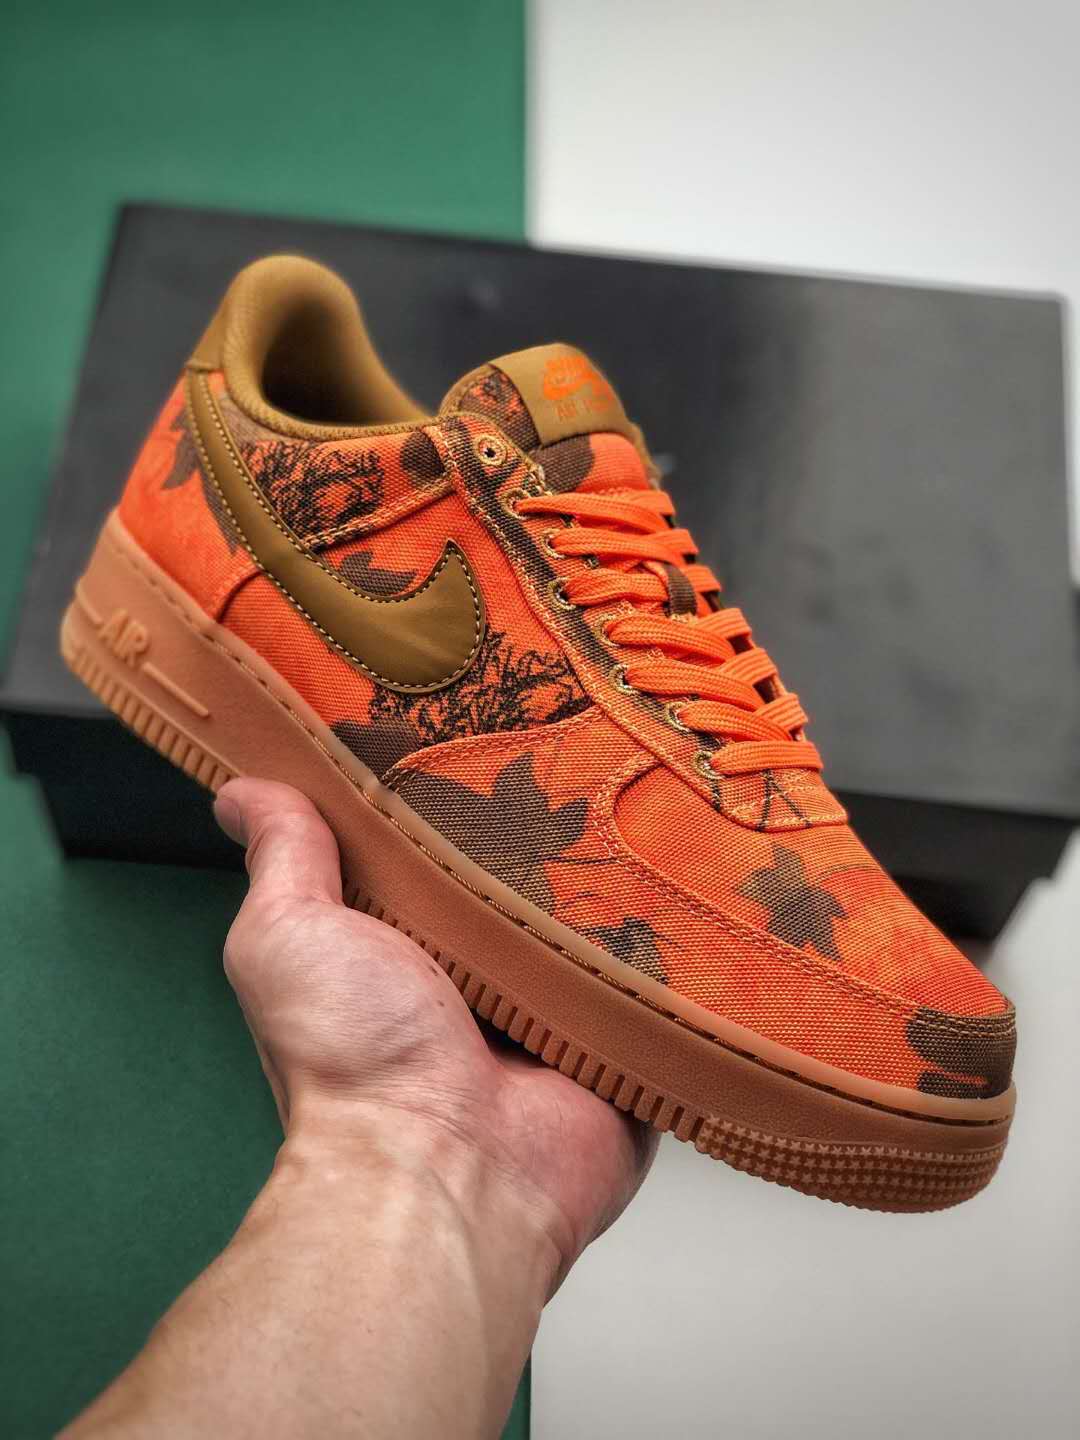 Nike Realtree x Air Force 1 Low 'Orange Camo' AO2441-800 - Limited Edition Authentic Sneakers | Free Shipping